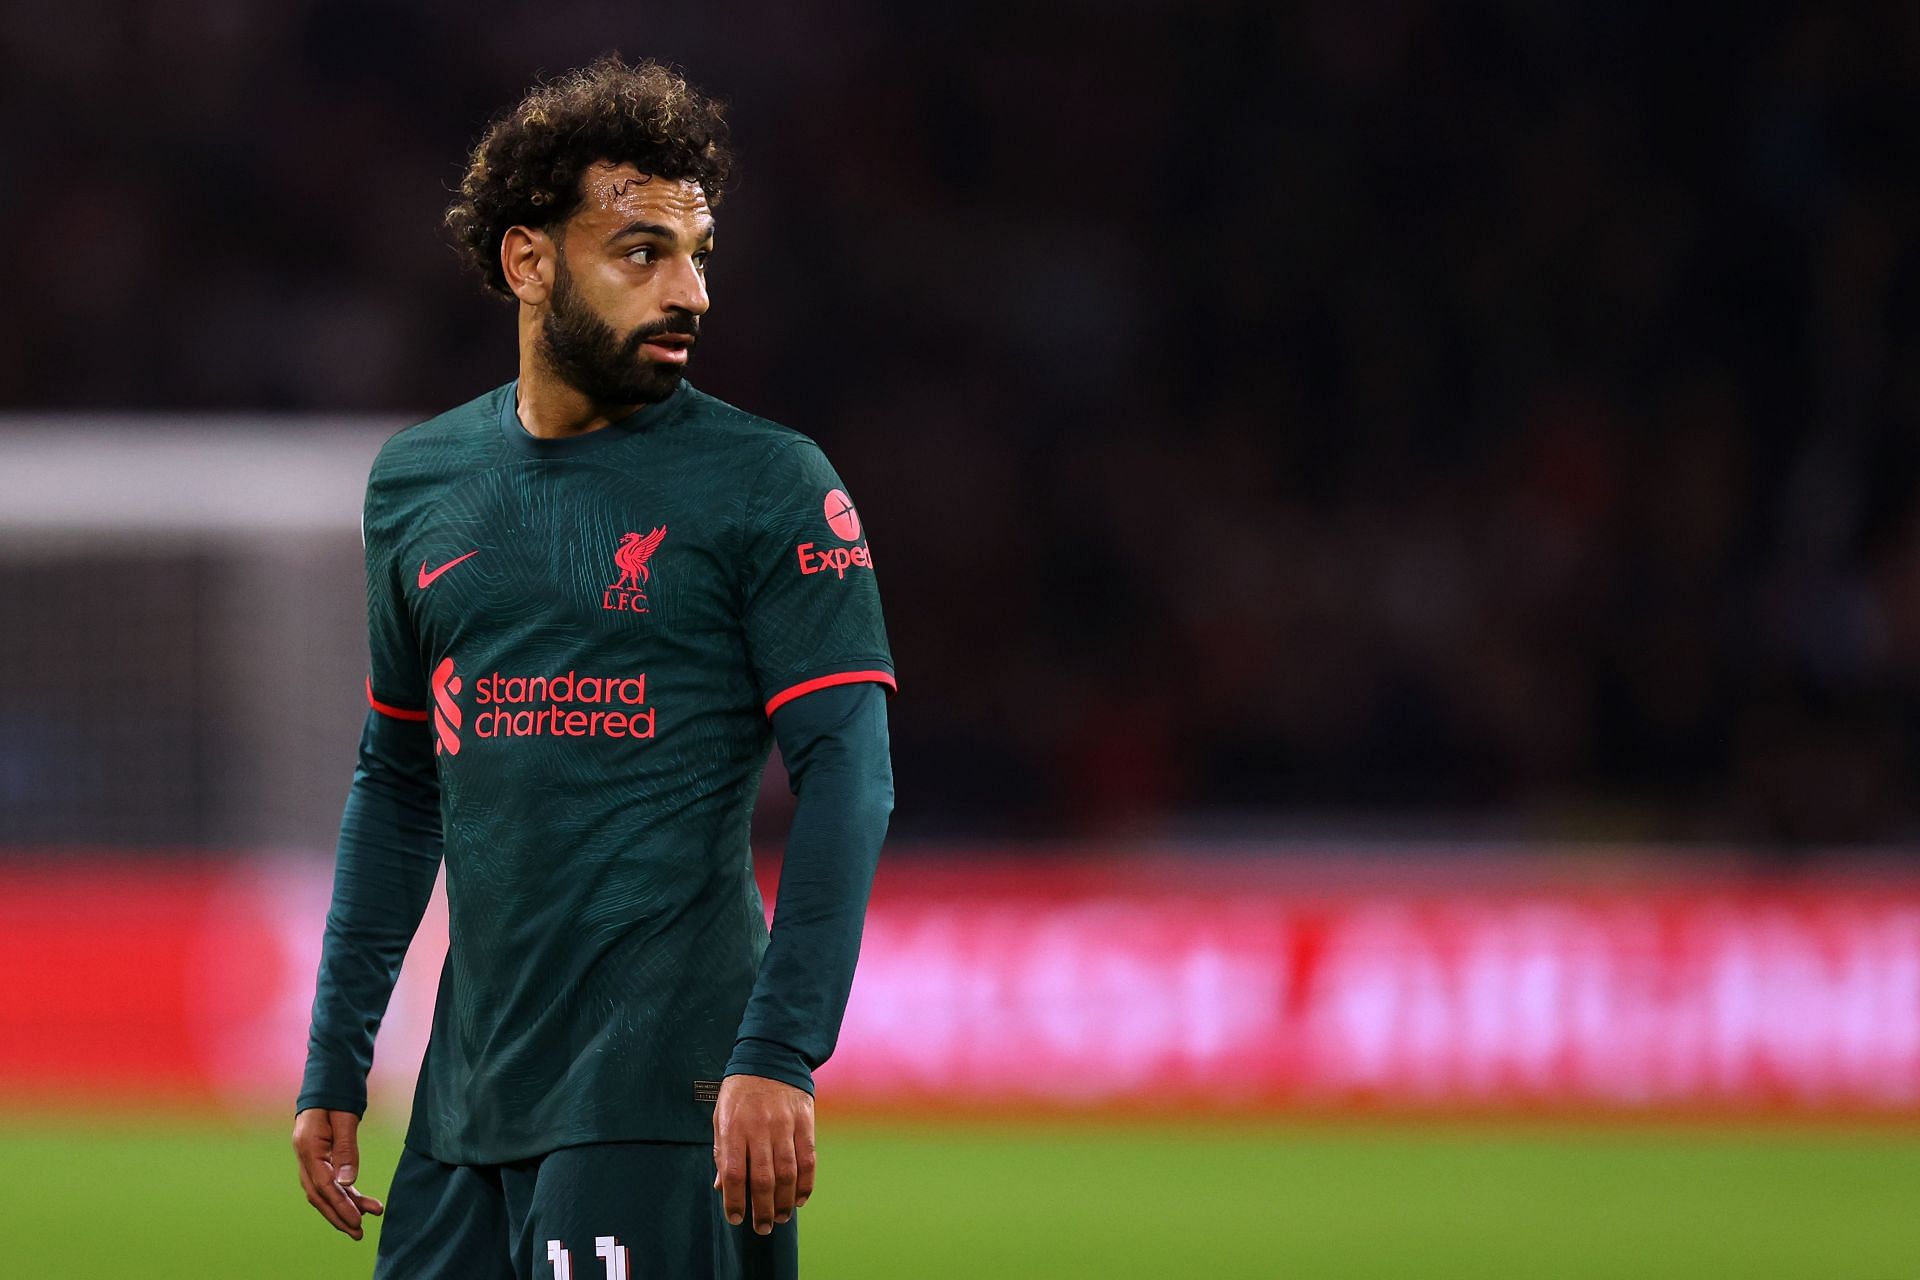 Salah has seven goal contribution for Liverpool in the league this season